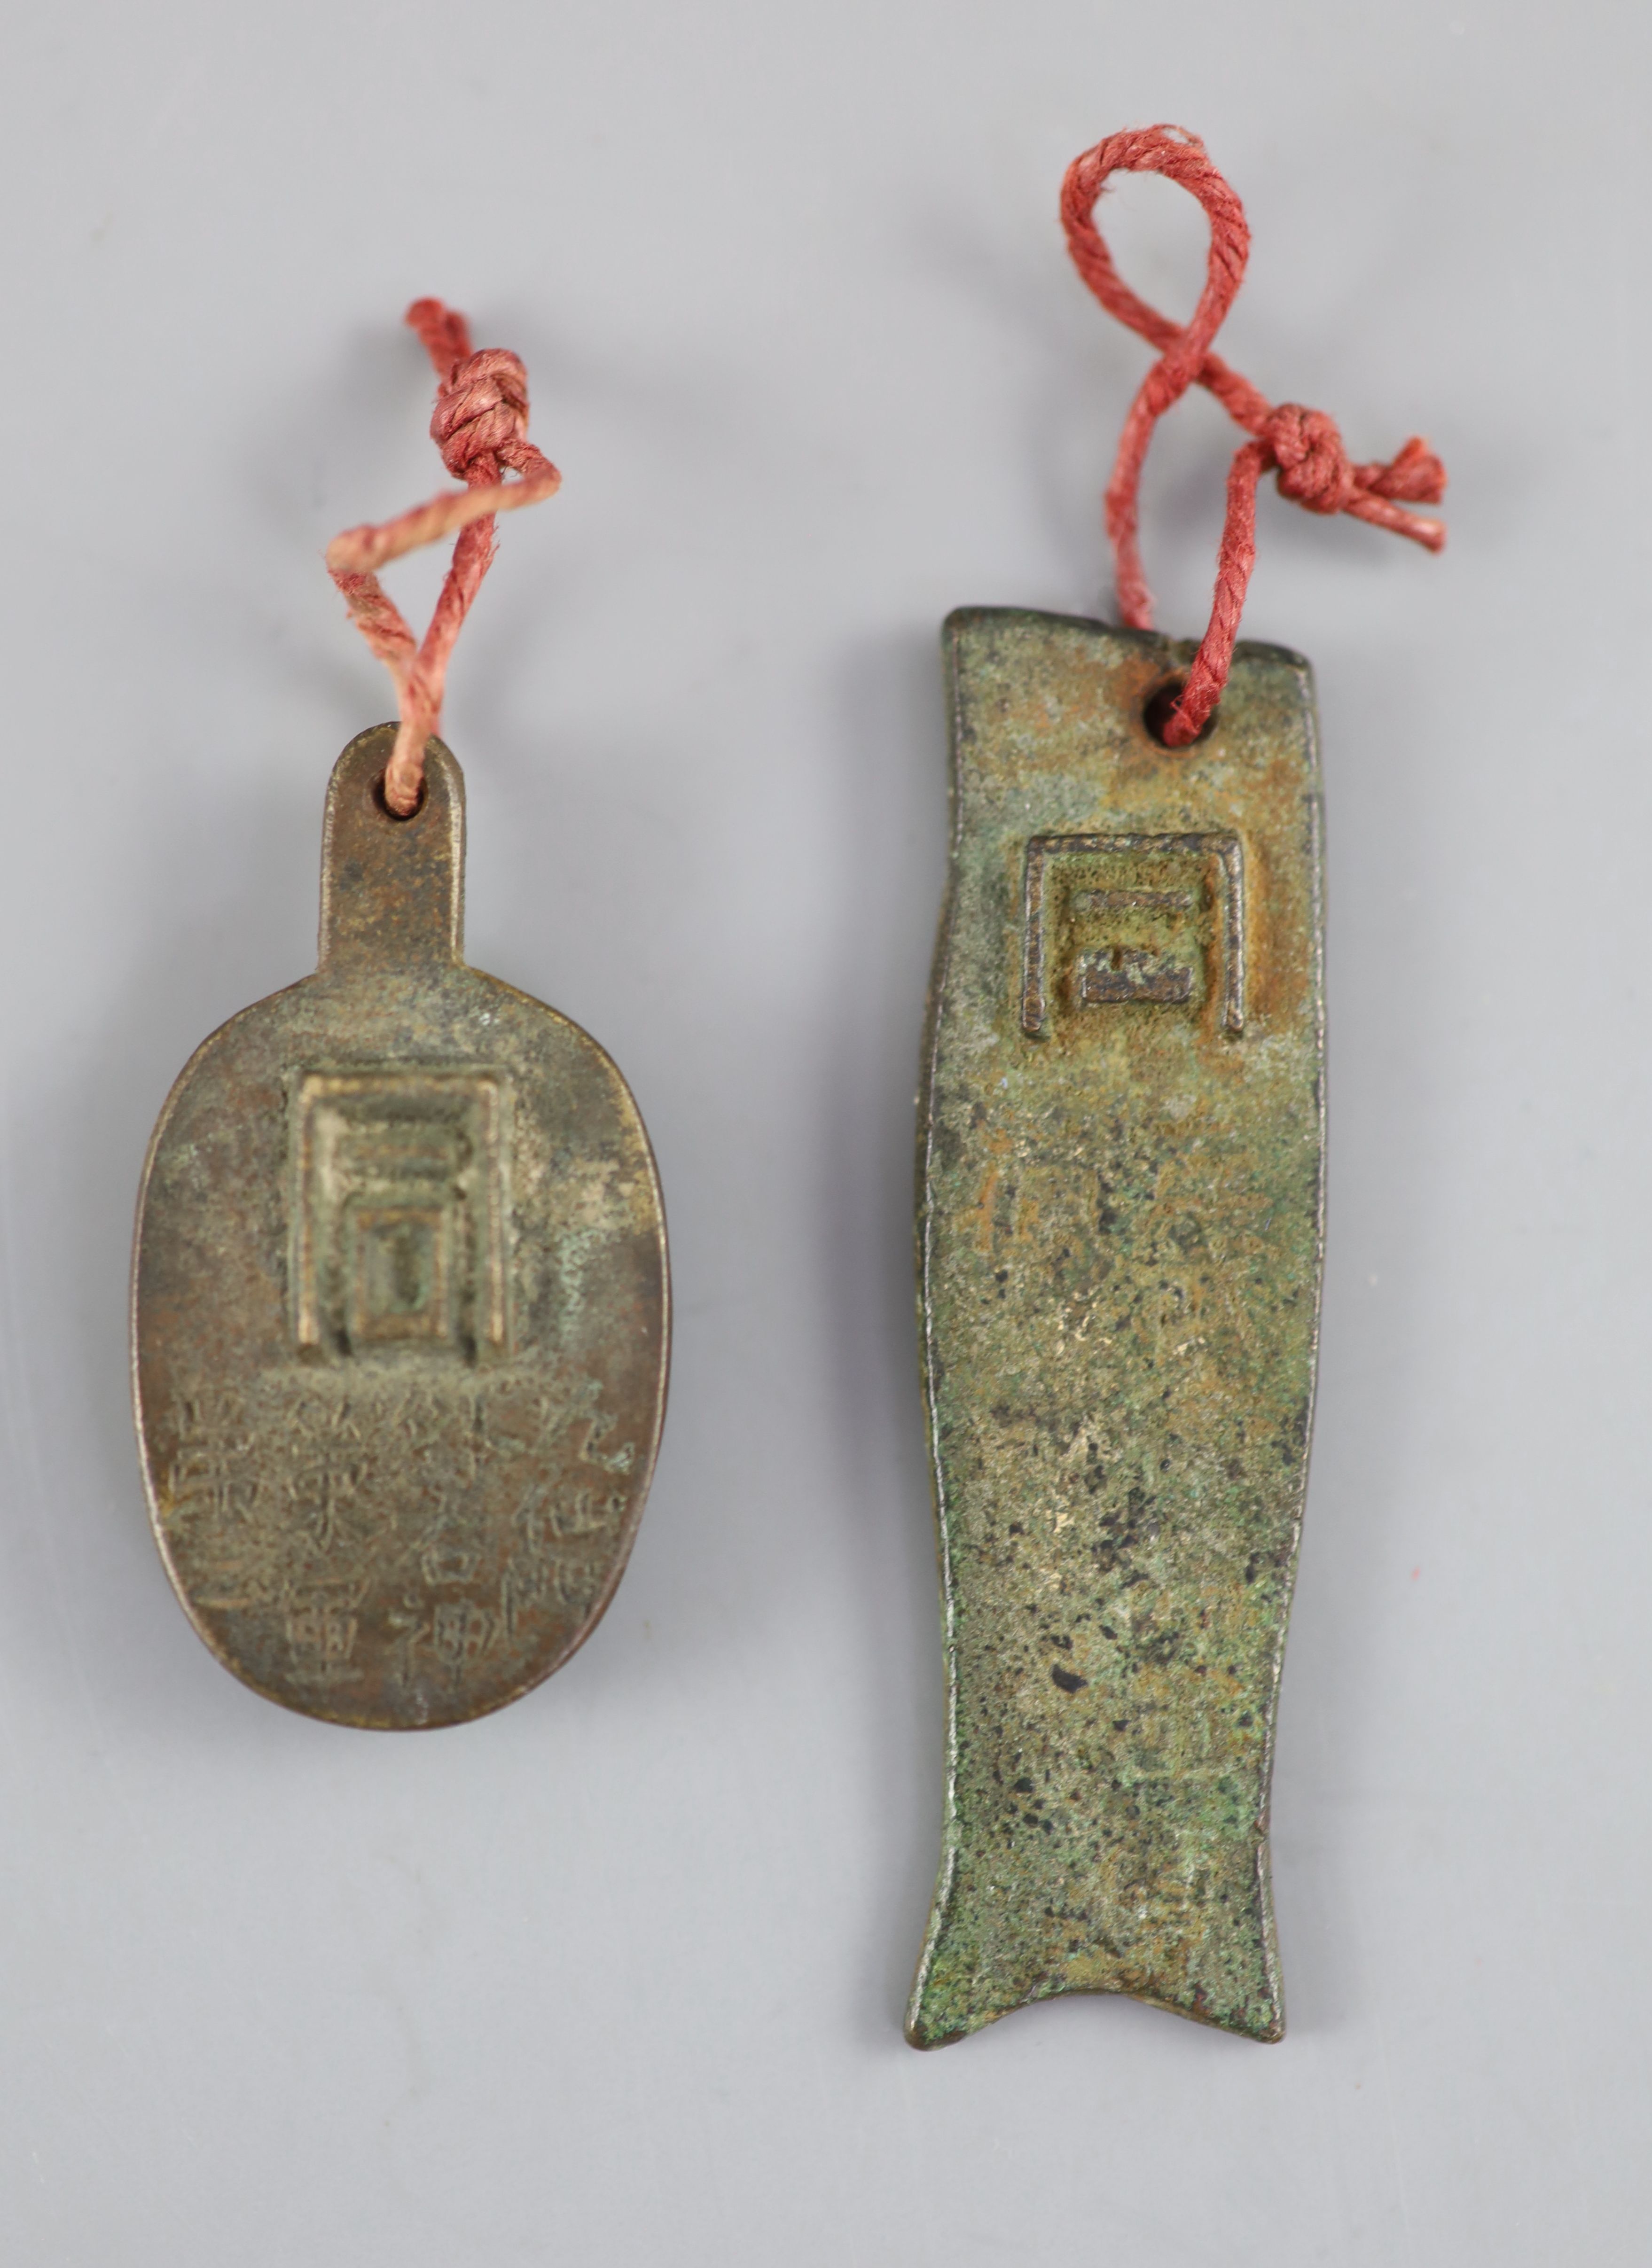 China, 2 archaistic bronze charms or amulets, Qing dynasty or earlier